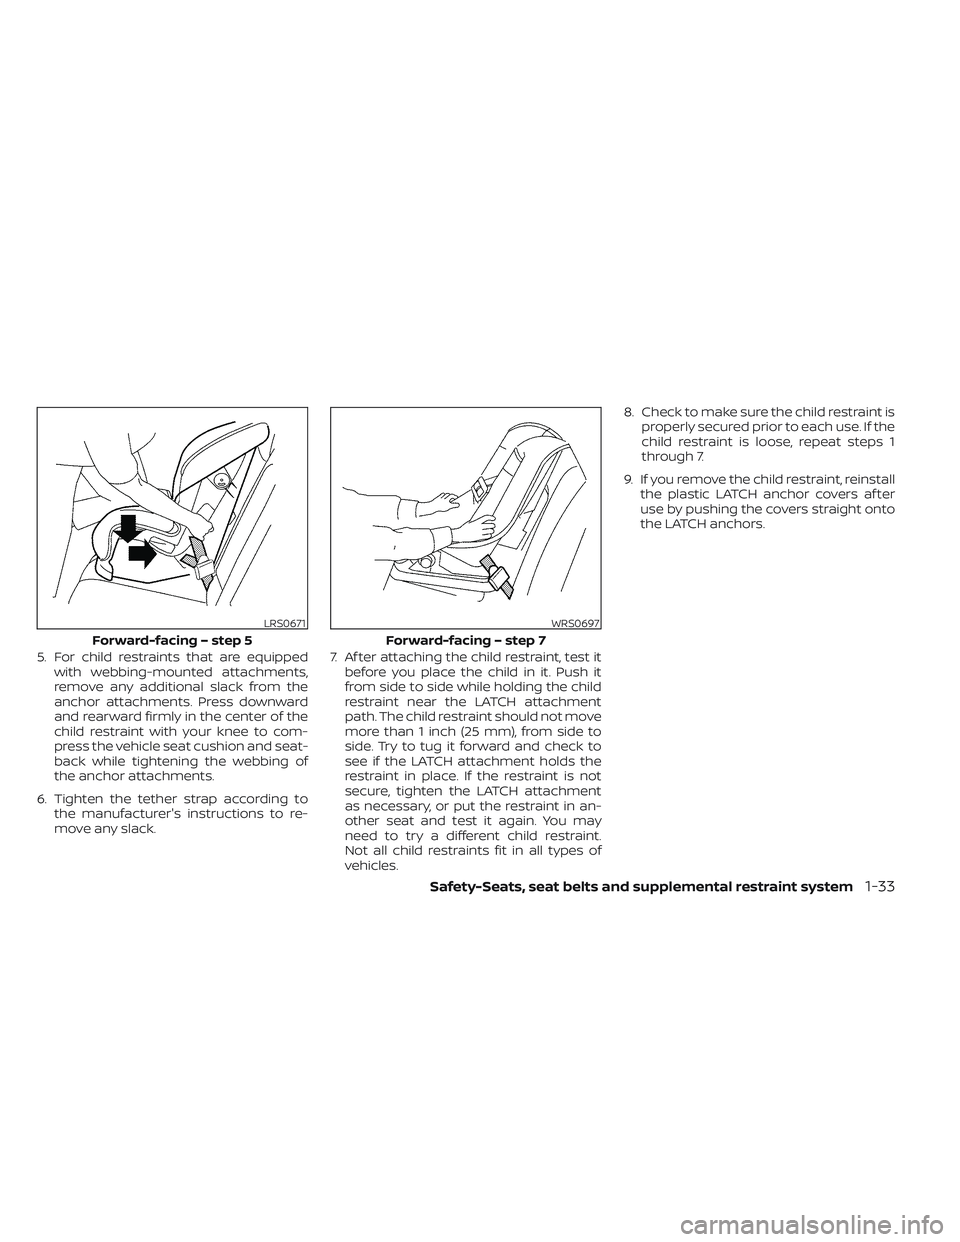 NISSAN MAXIMA 2023 Workshop Manual 5. For child restraints that are equippedwith webbing-mounted attachments,
remove any additional slack from the
anchor attachments. Press downward
and rearward firmly in the center of the
child restra